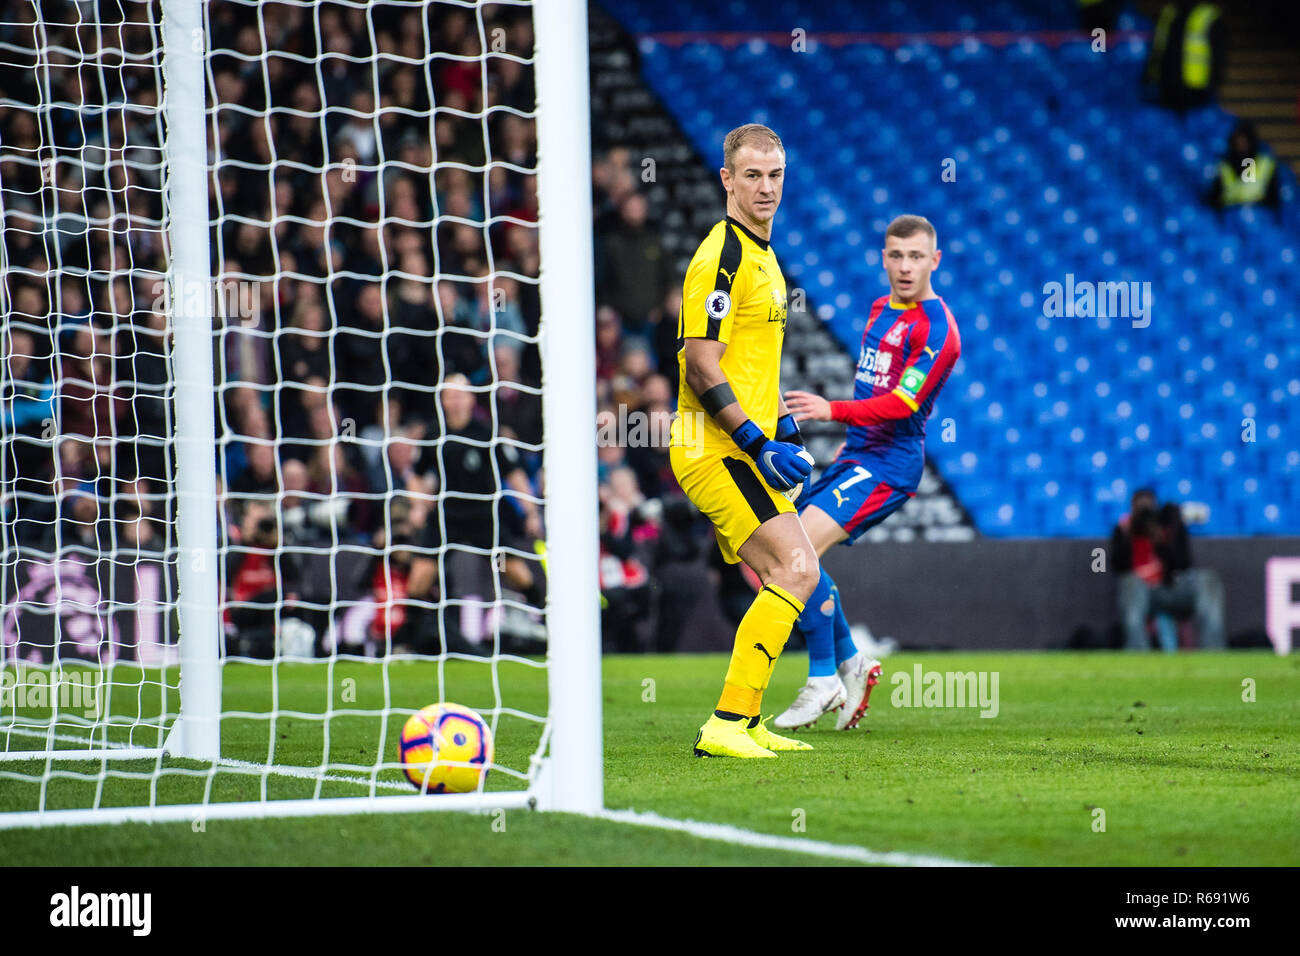 LONDON, ENGLAND - DECEMBER 01: Joe Hart of Burnley FC concede goal after James McArthur (not on picture) shot during the Premier League match between Crystal Palace and Burnley FC at Selhurst Park on December 1, 2018 in London, United Kingdom. (Photo by Sebastian Frej/MB Media) Stock Photo